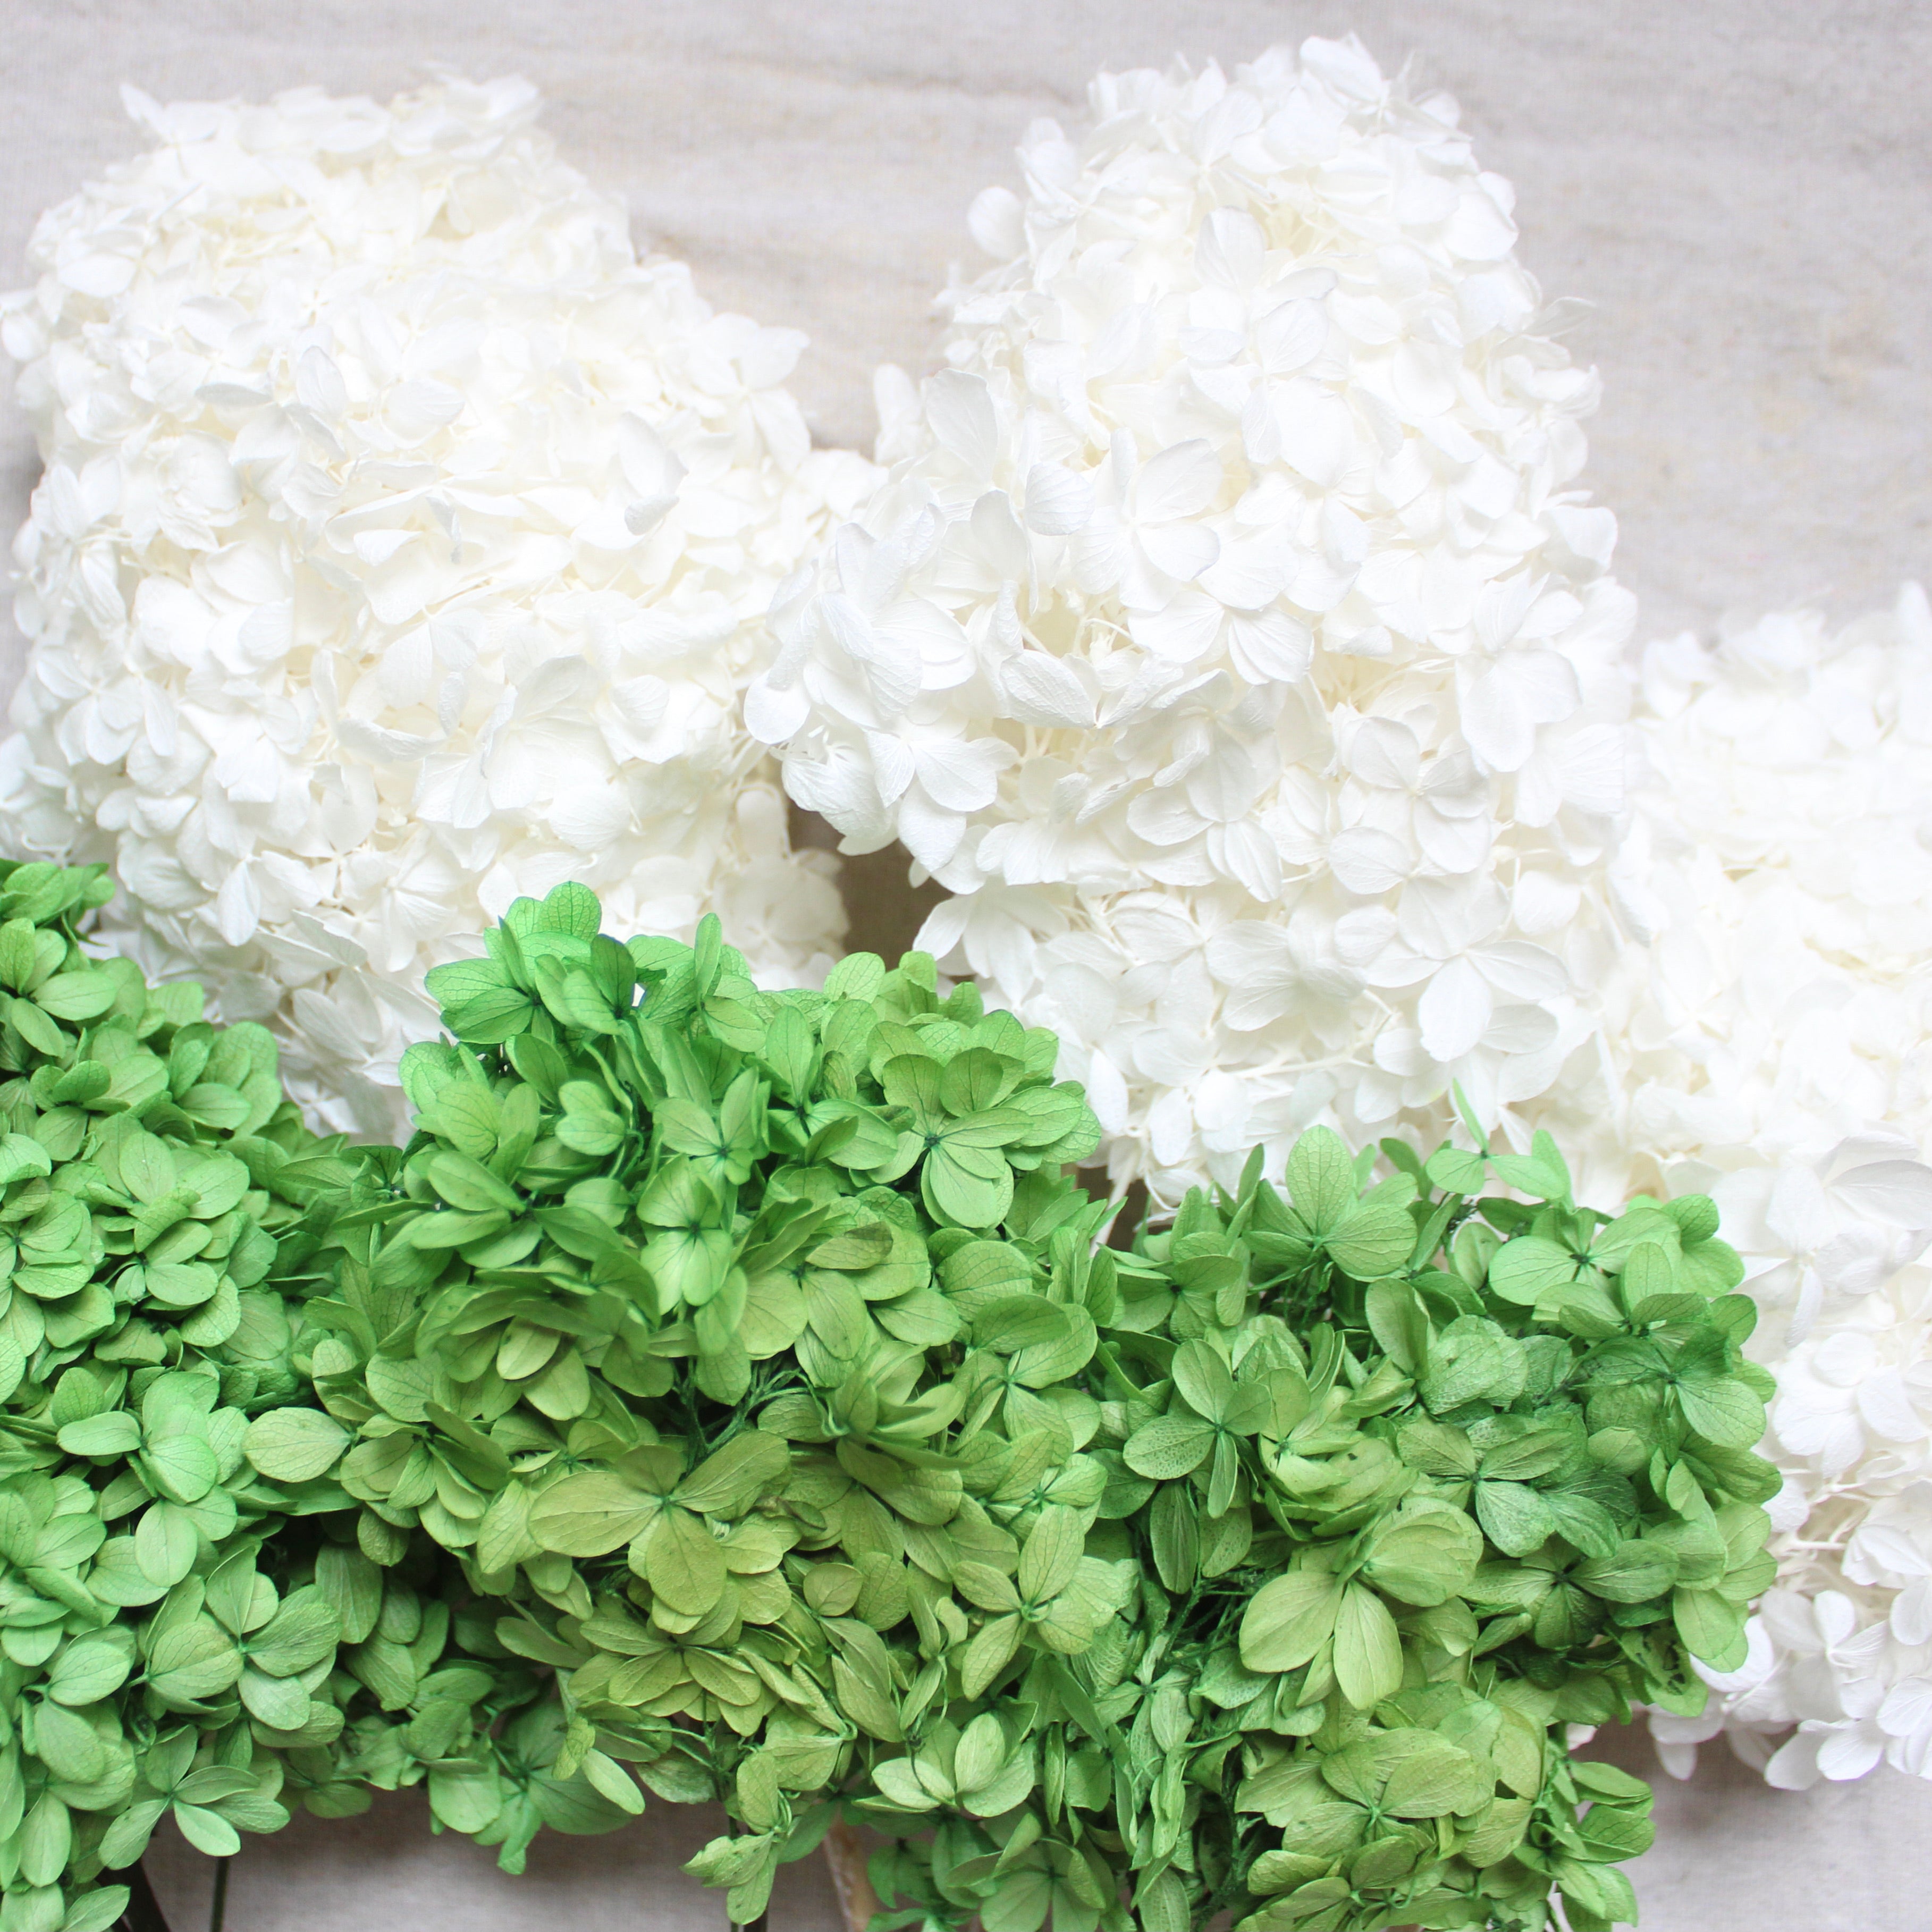 Dried Hydrangea Flower Bunch - Limelight Color